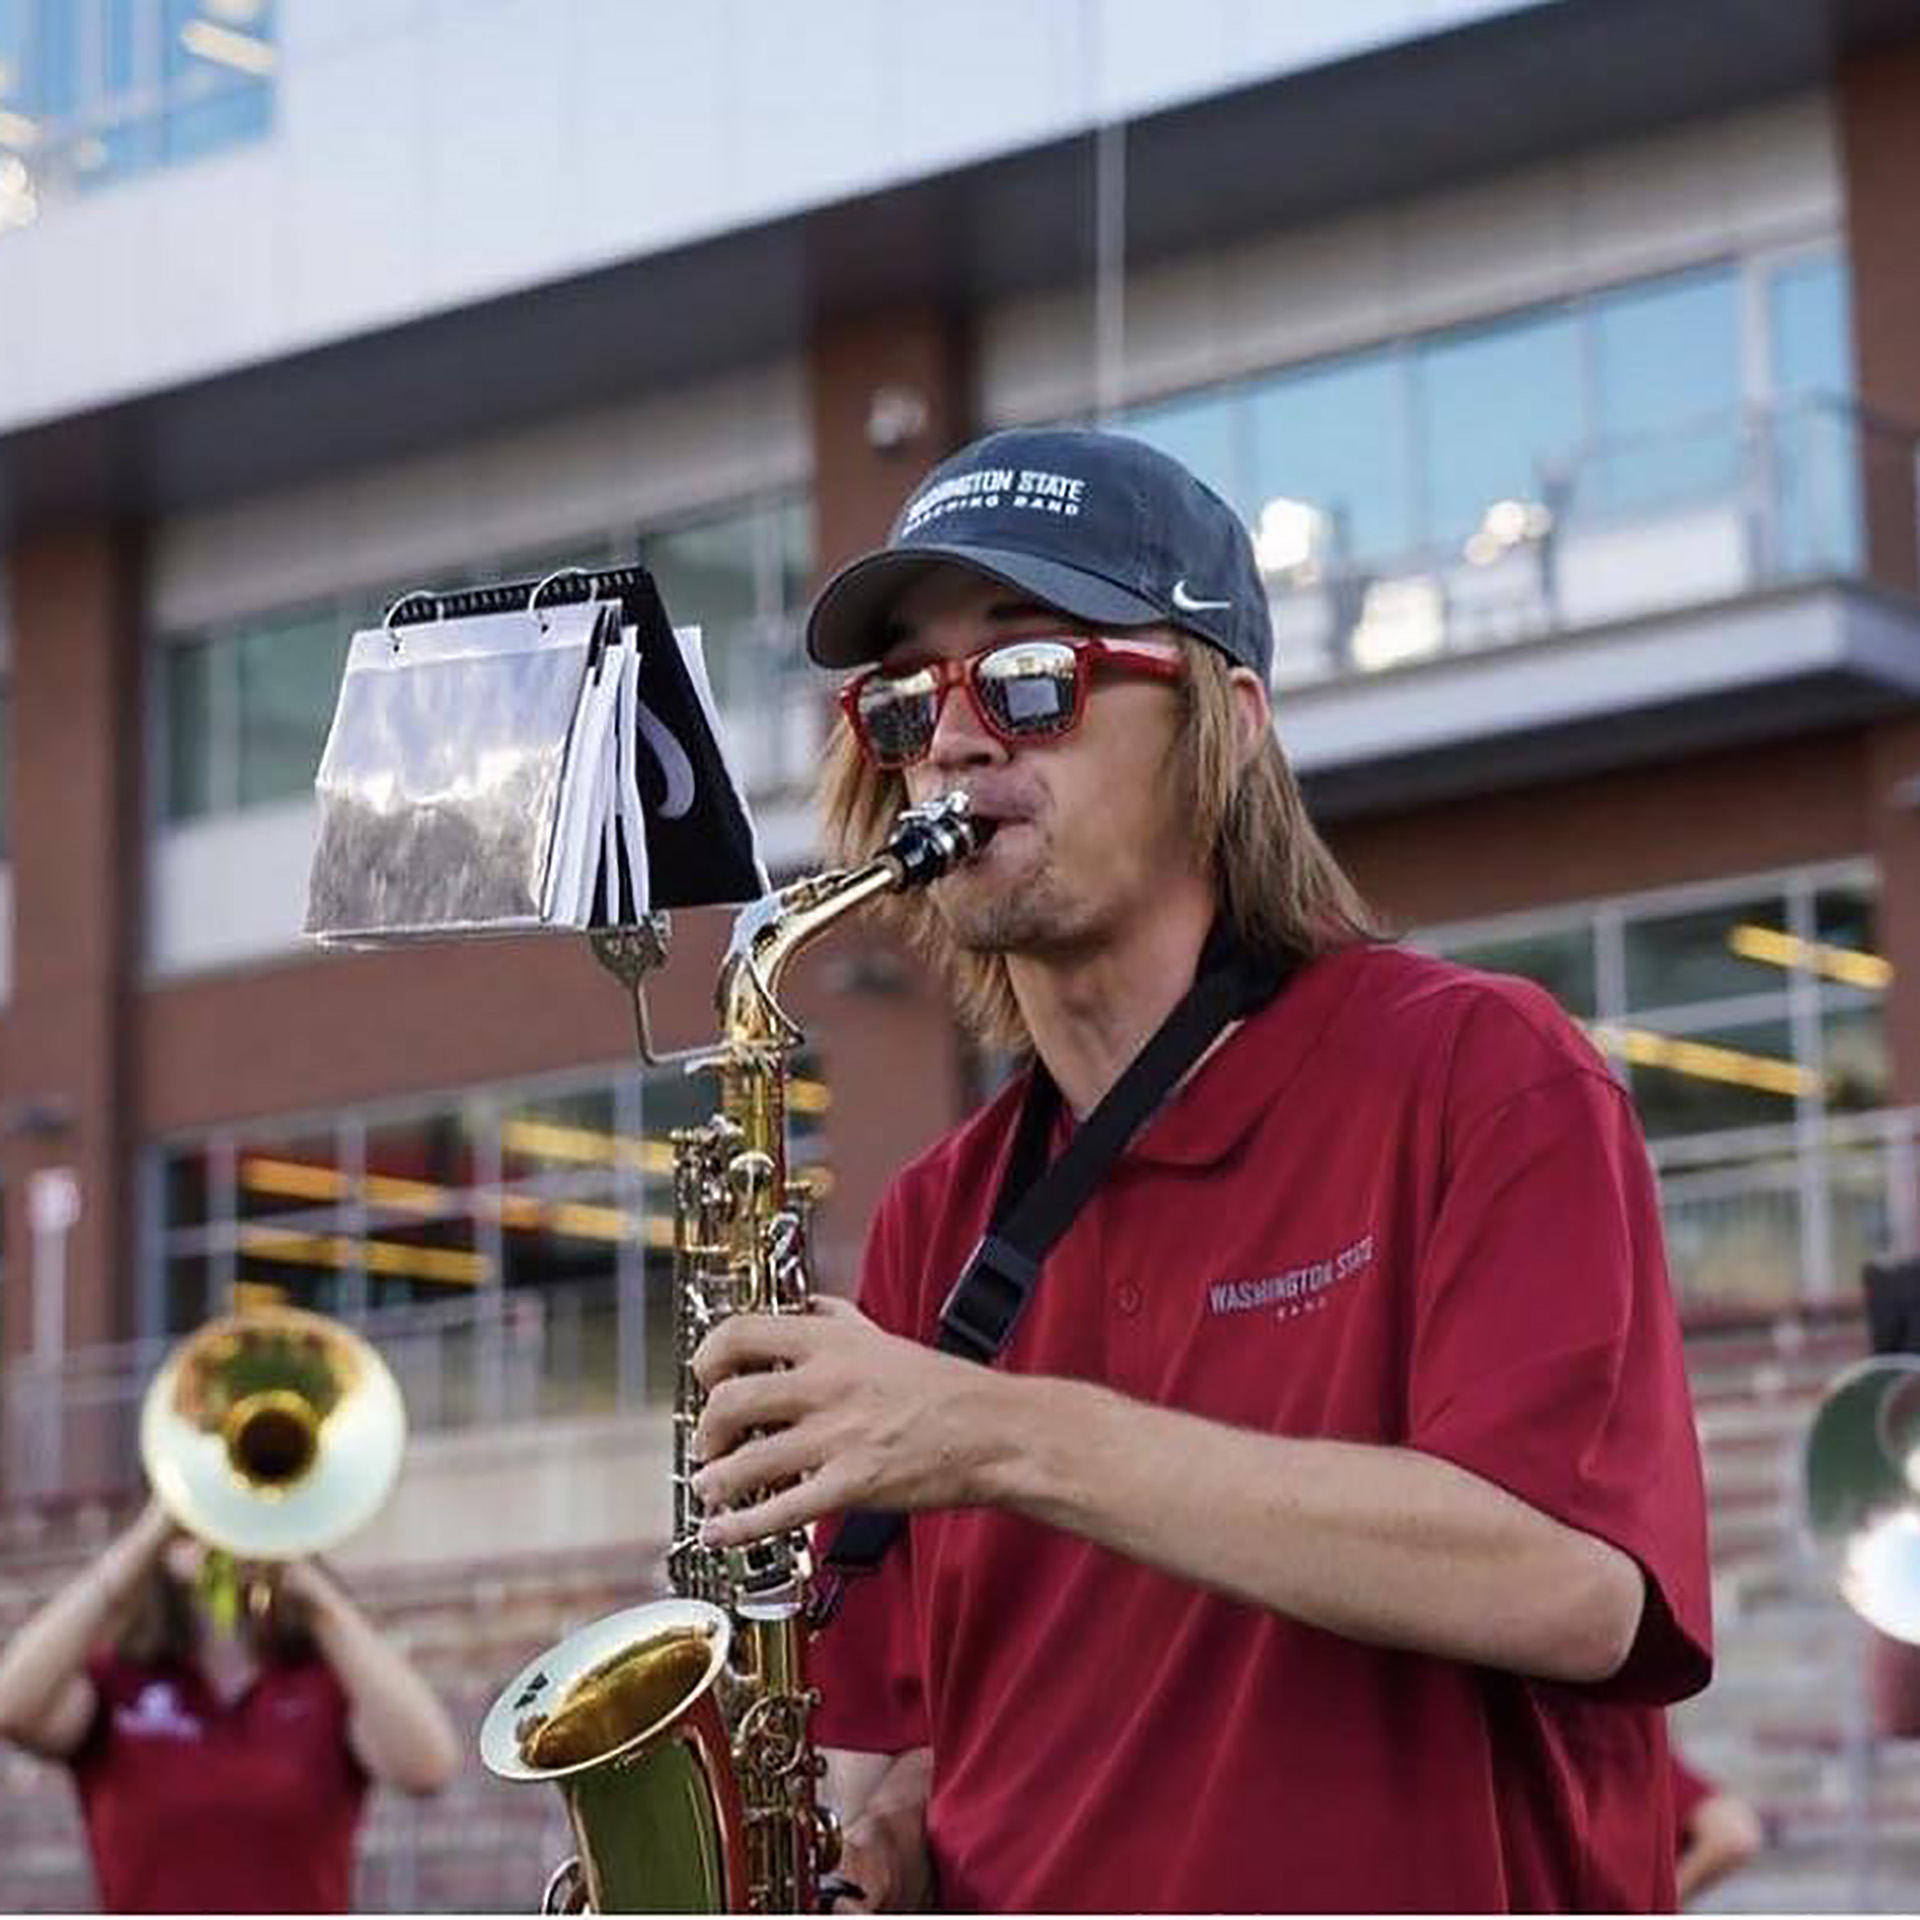 Sam Loomis joined the WSU marching band on saxophone